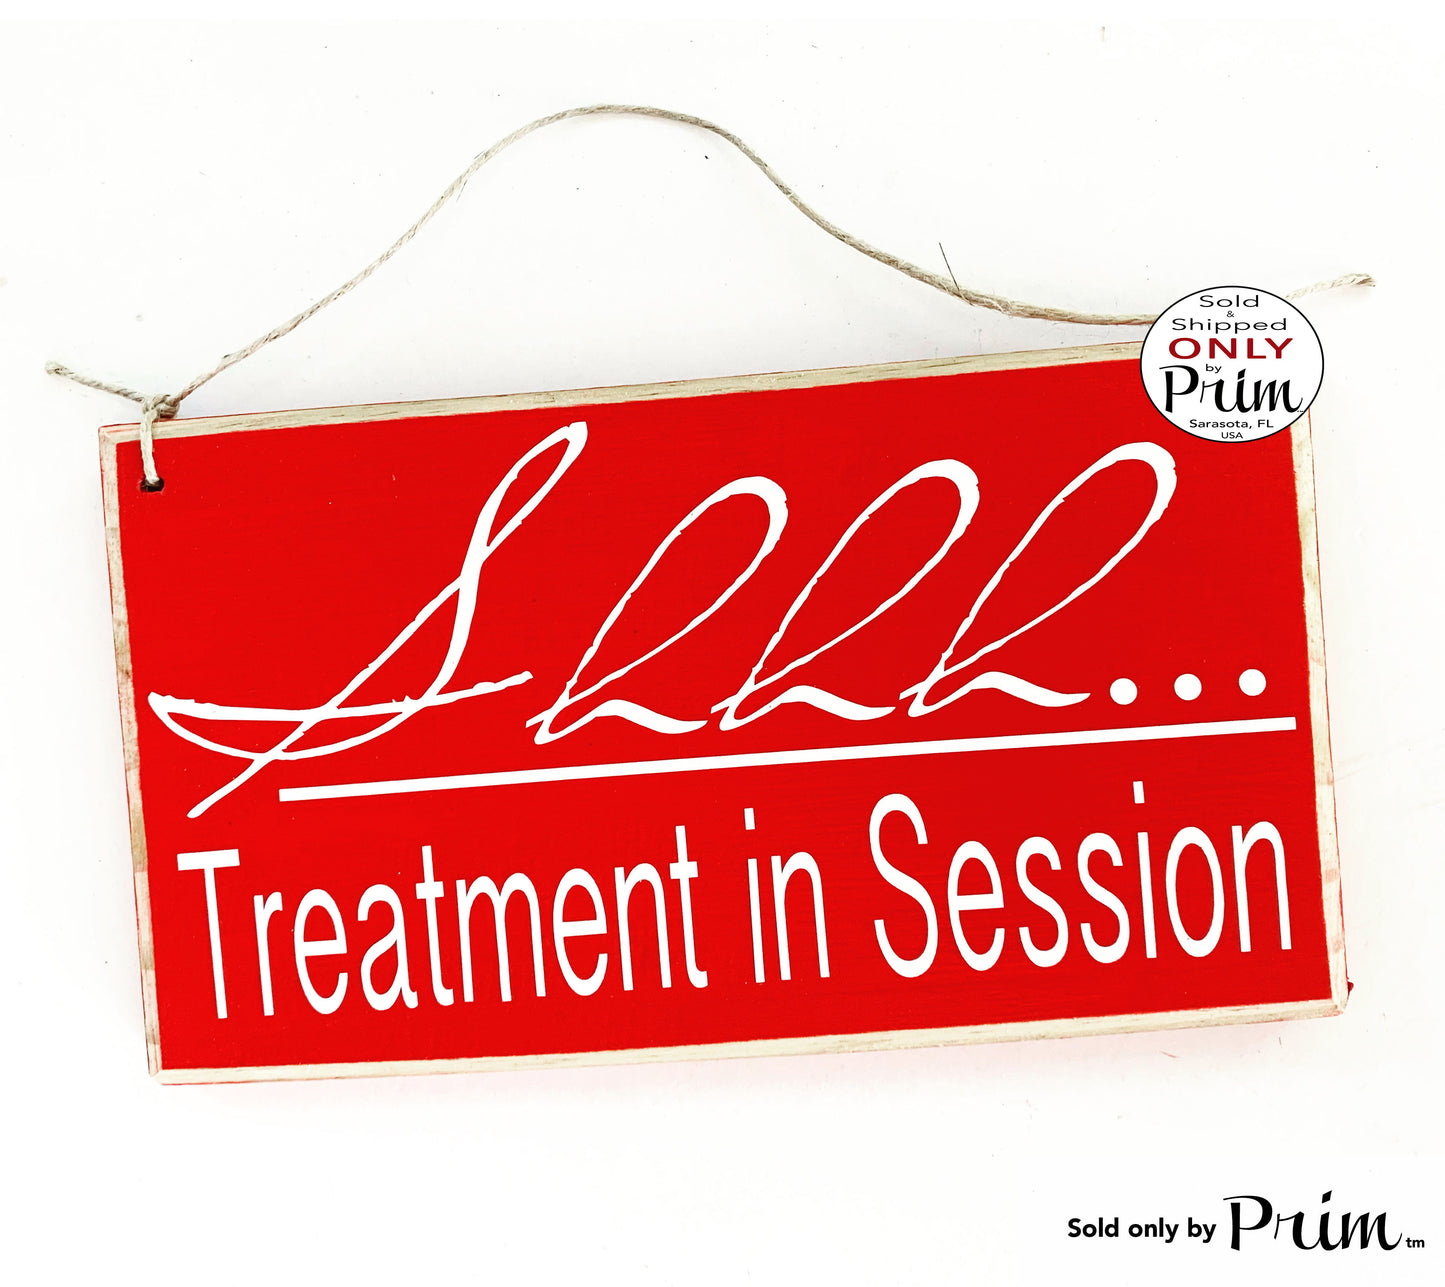 10x6 Shhh Treatment In Session Custom Wood Sign | Please Do Not Disturb Soft Voices Quiet Spa Salon Progress Relaxation Door Wall Plaque Designs by Prim